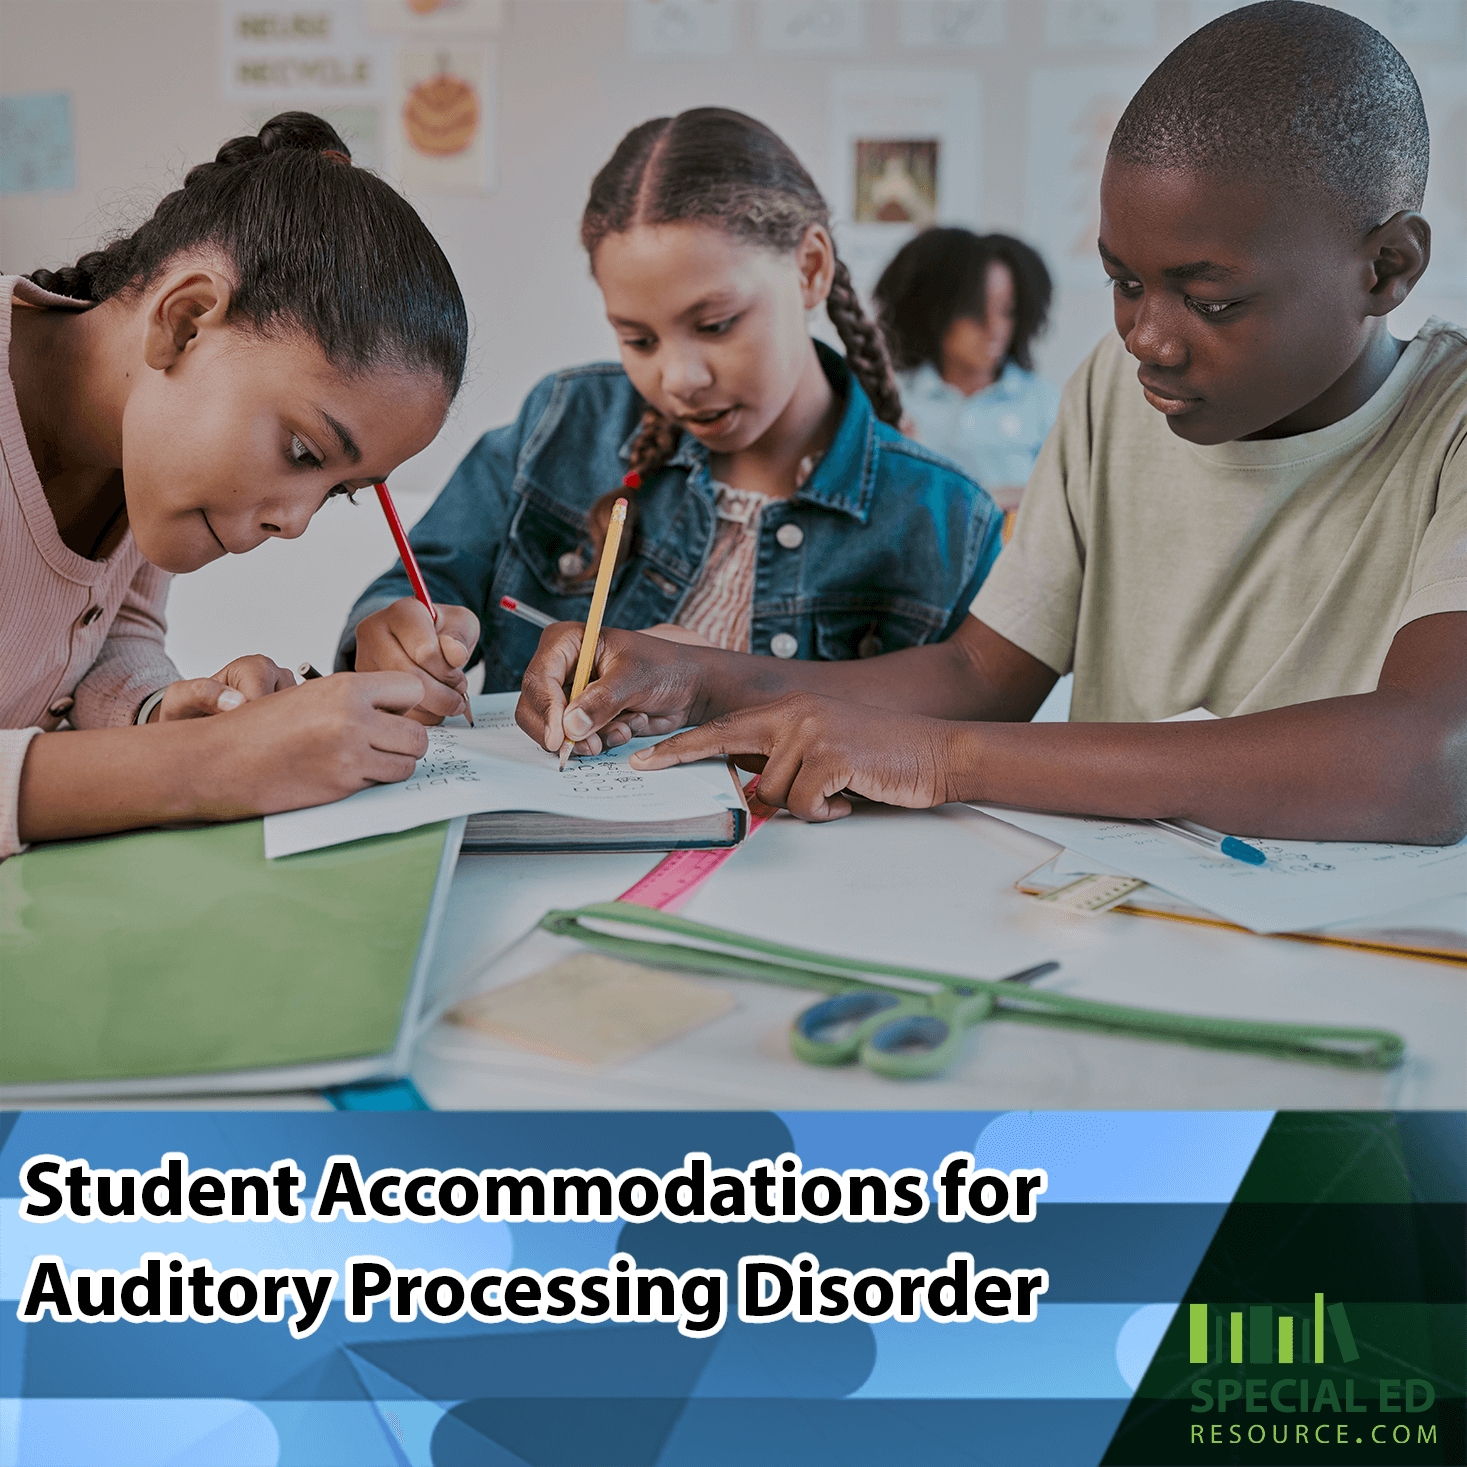 Three diverse students working together on an assignment with focus and coordination in a classroom setting, visually illustrating accommodations for auditory processing disorder, with a banner at the bottom stating 'Student Accommodations for Auditory Processing Disorder - SpecialEdResource.com.